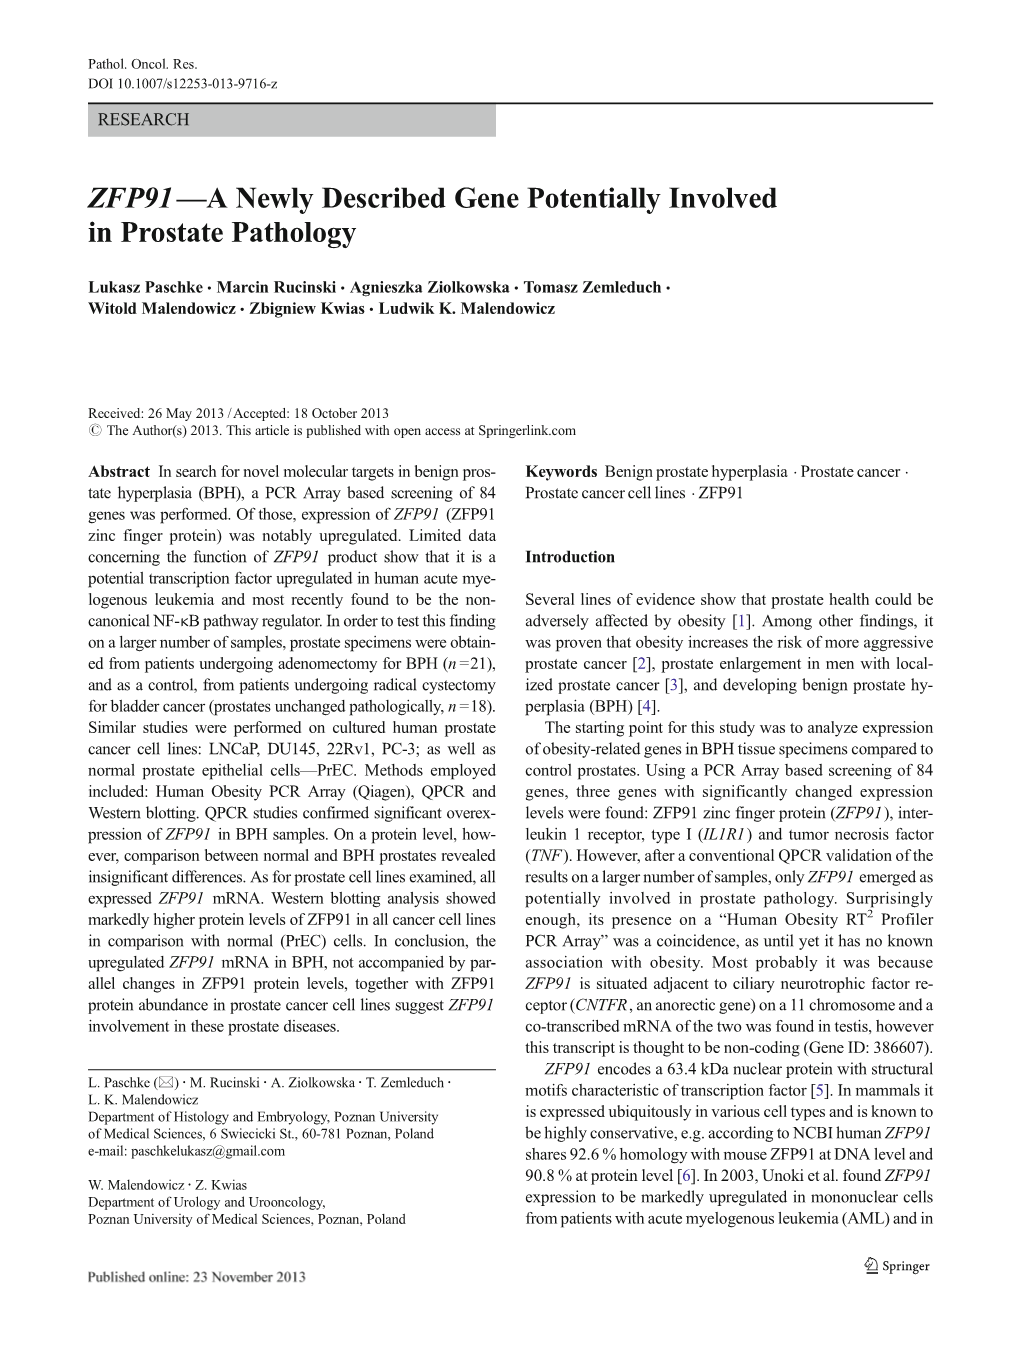 ZFP91—A Newly Described Gene Potentially Involved in Prostate Pathology